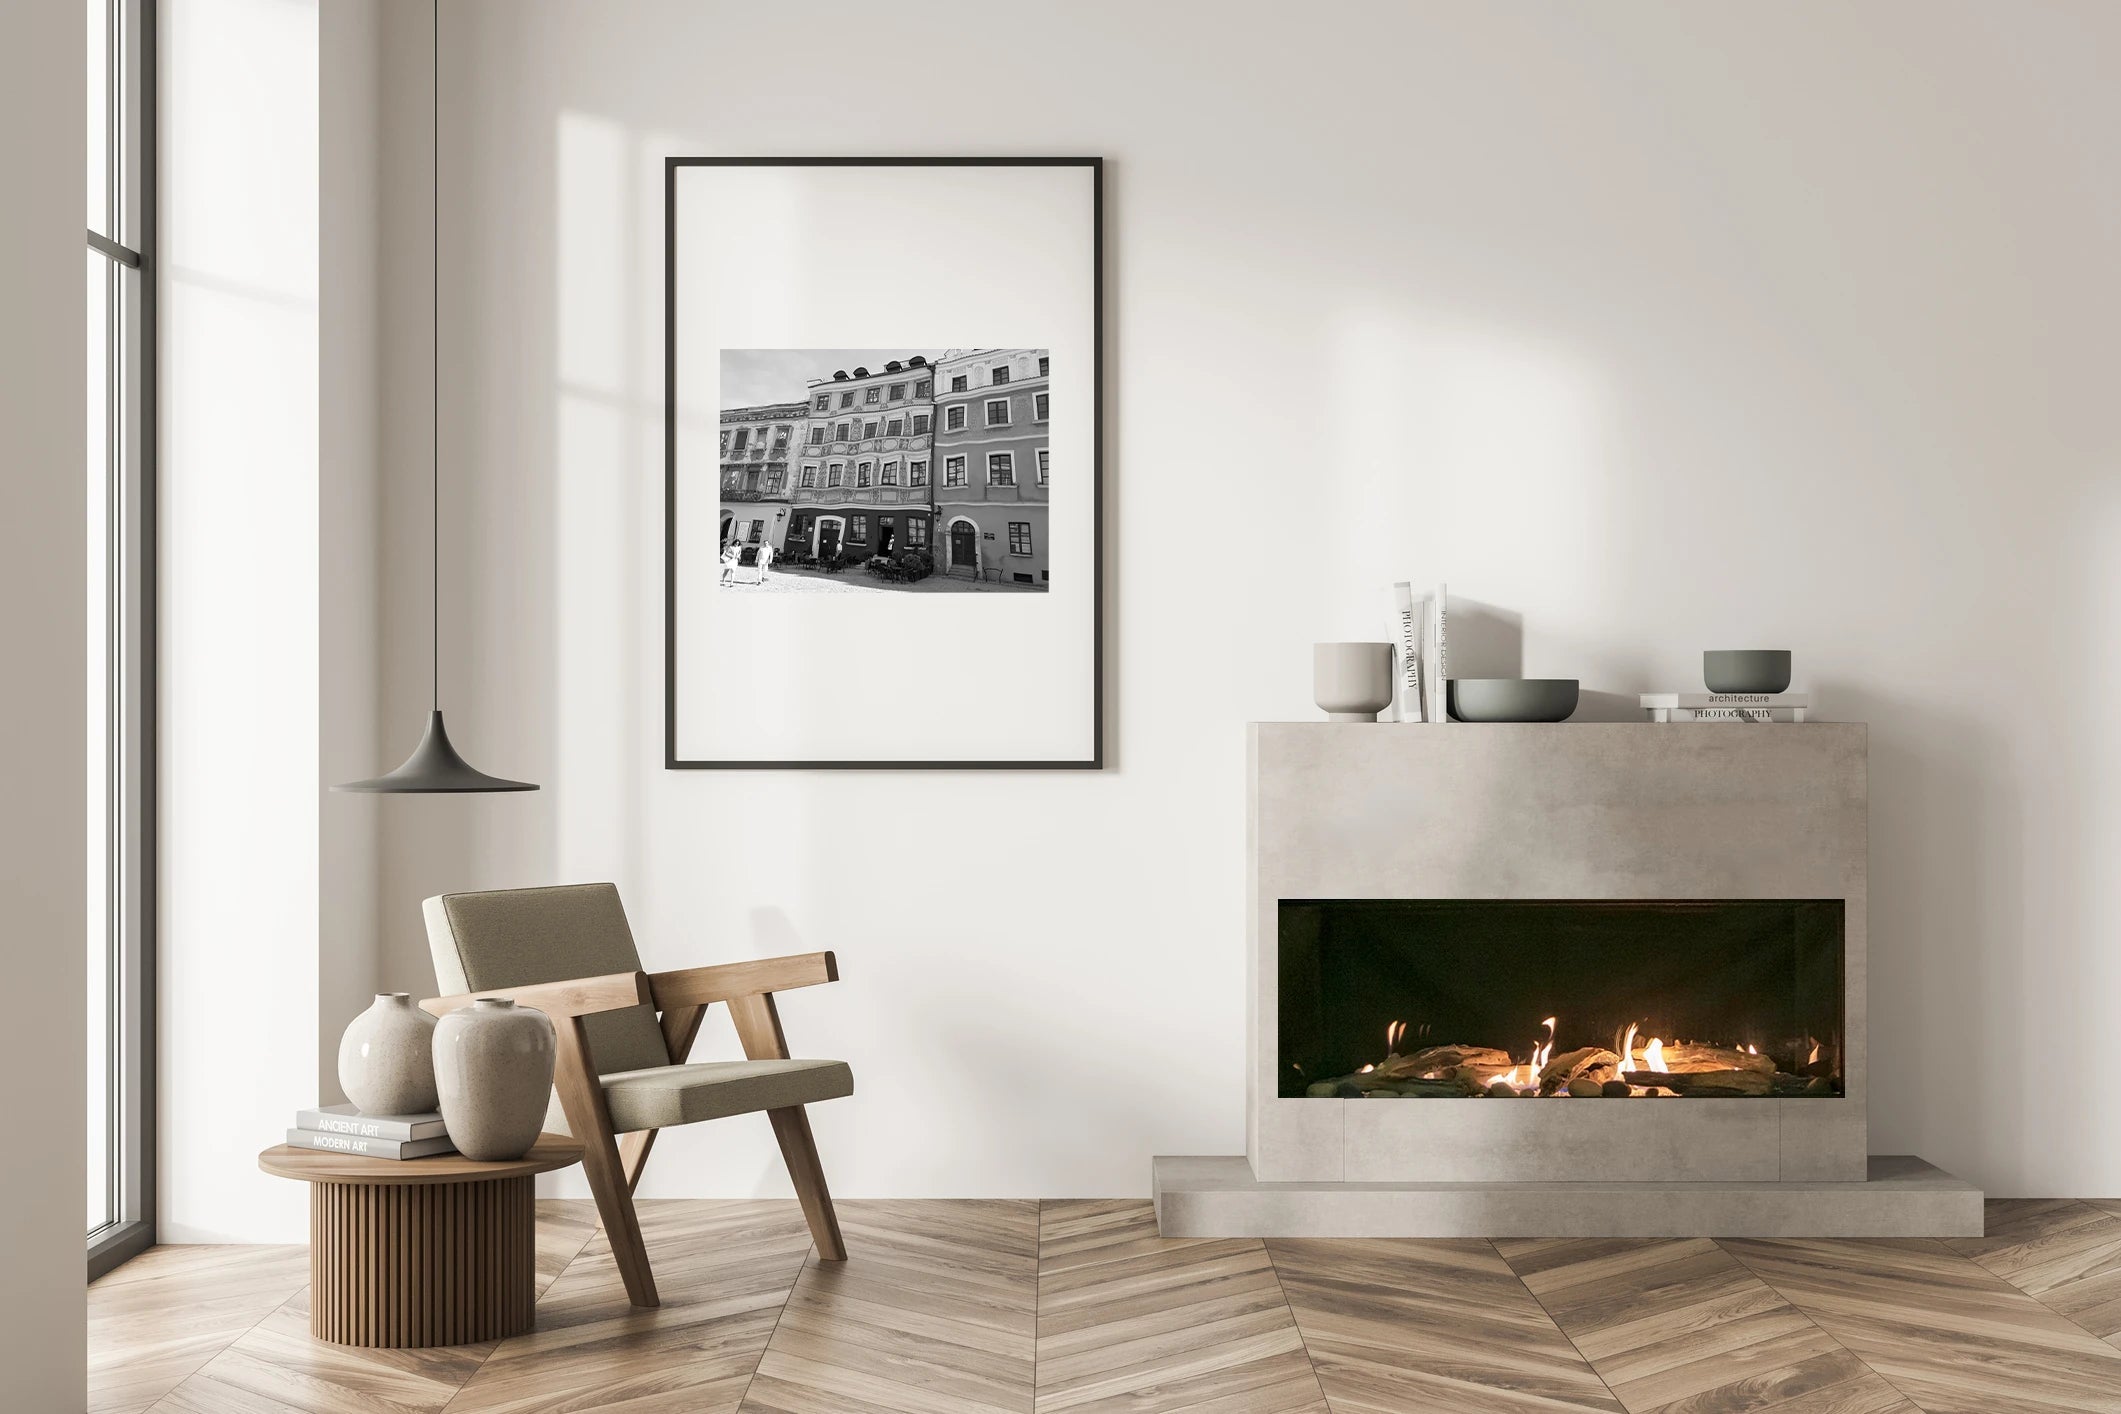 Sierra Flame Vienna Direct Vent Linear Gas Fireplace - Natural Gas or Liquid Propane- Lifestyle Minimalist Living  Room With White Wall Electric Fireplace